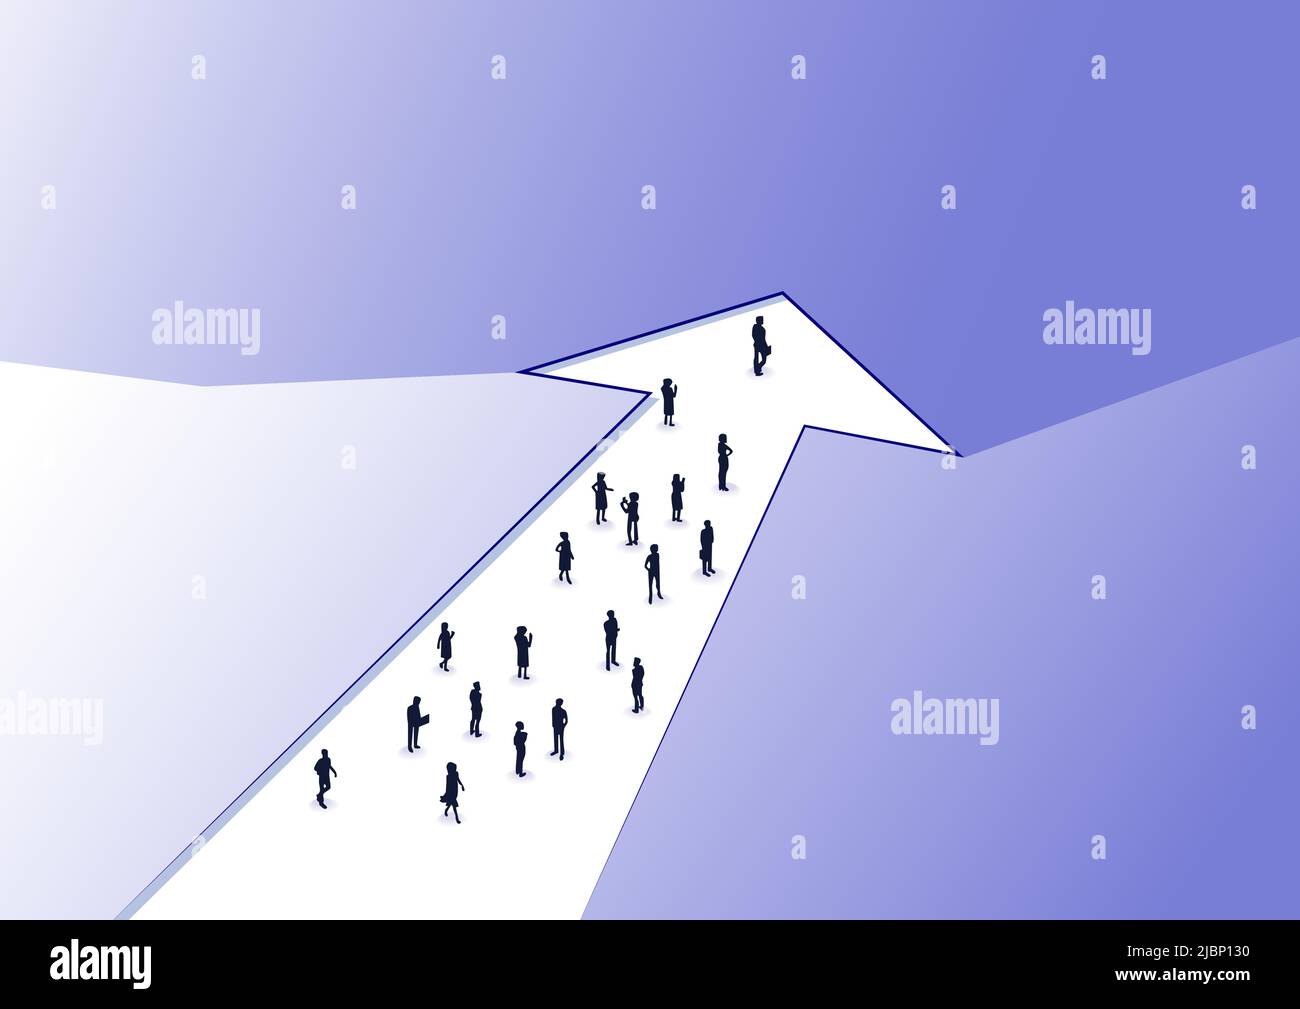 Business concept of organisational change and business transformation. Arrow pointing upward into the future. 3d isometric vector illustration of a gr Stock Vector